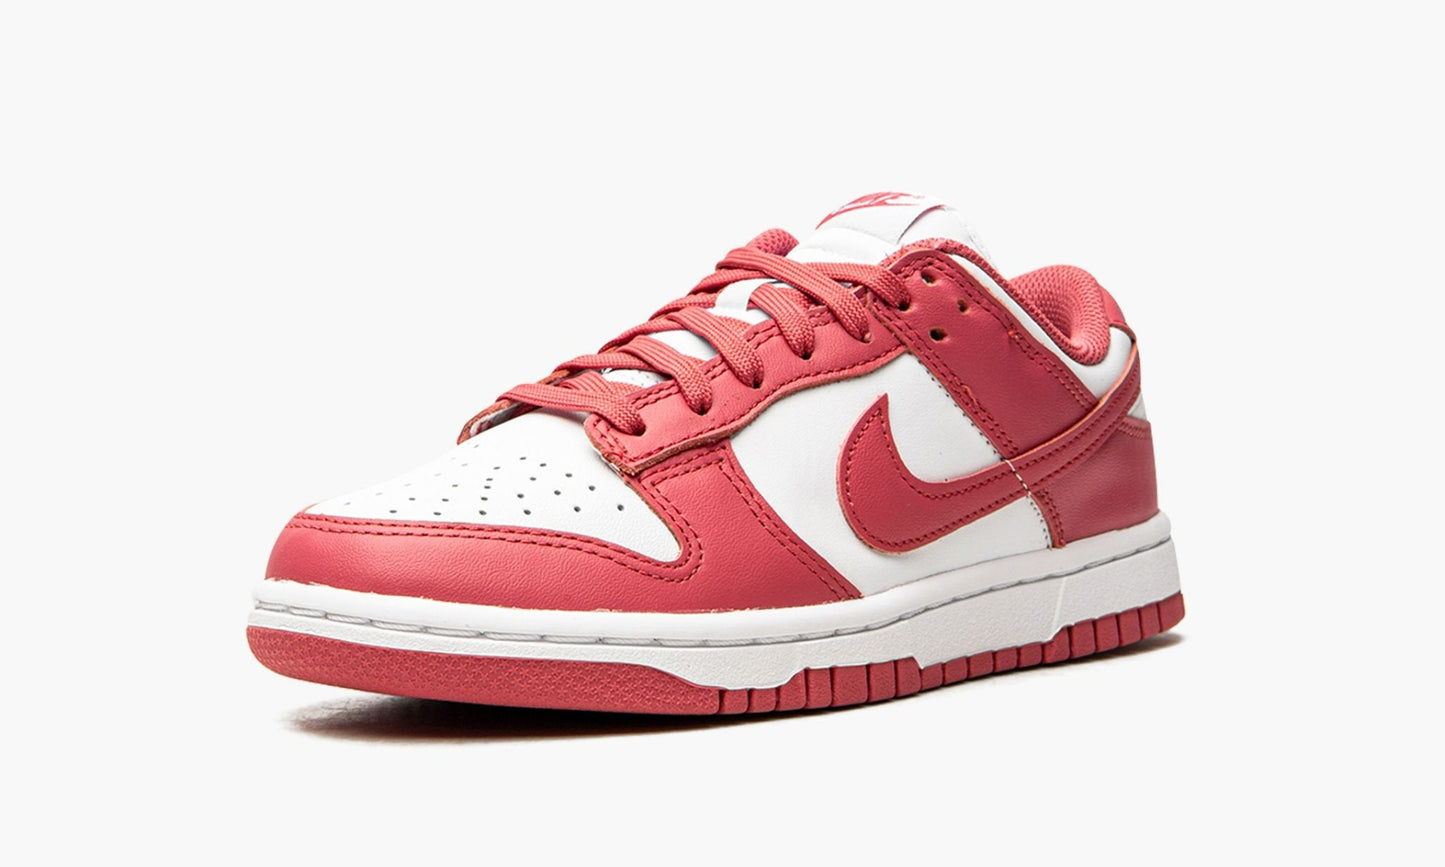 WMNS Dunk low "White/Archeo Pink"